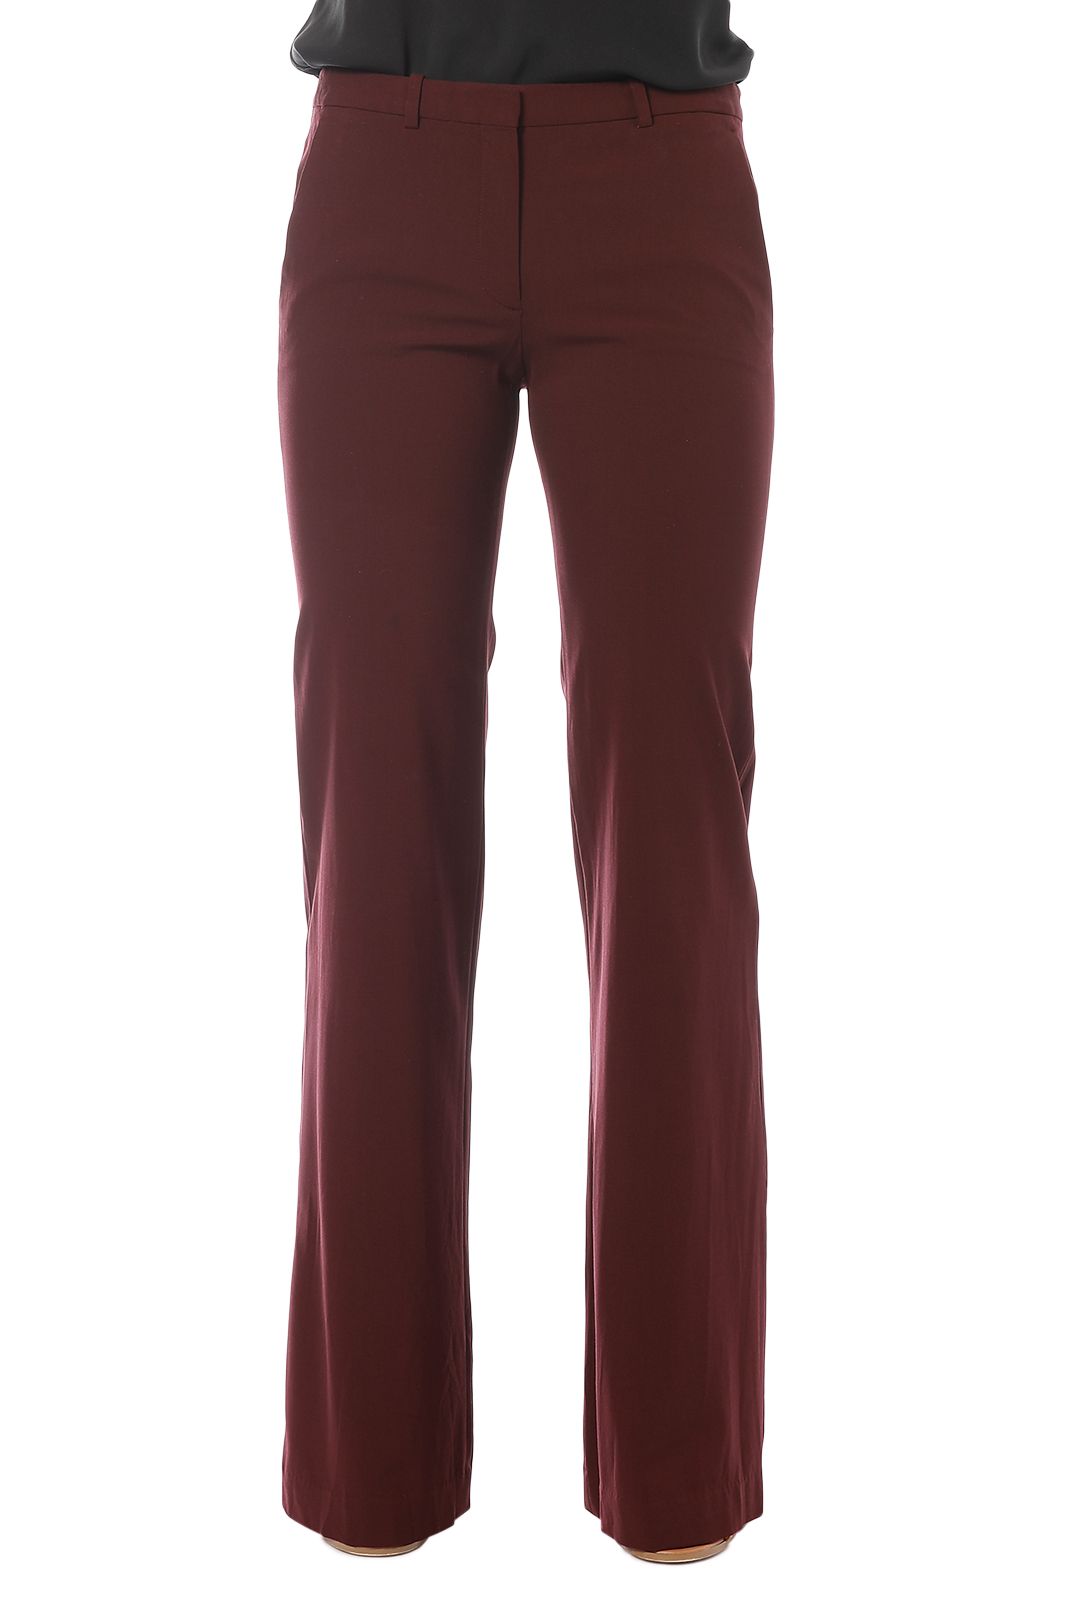 Theory - Crepe Pant - Burgundy - Front Crop